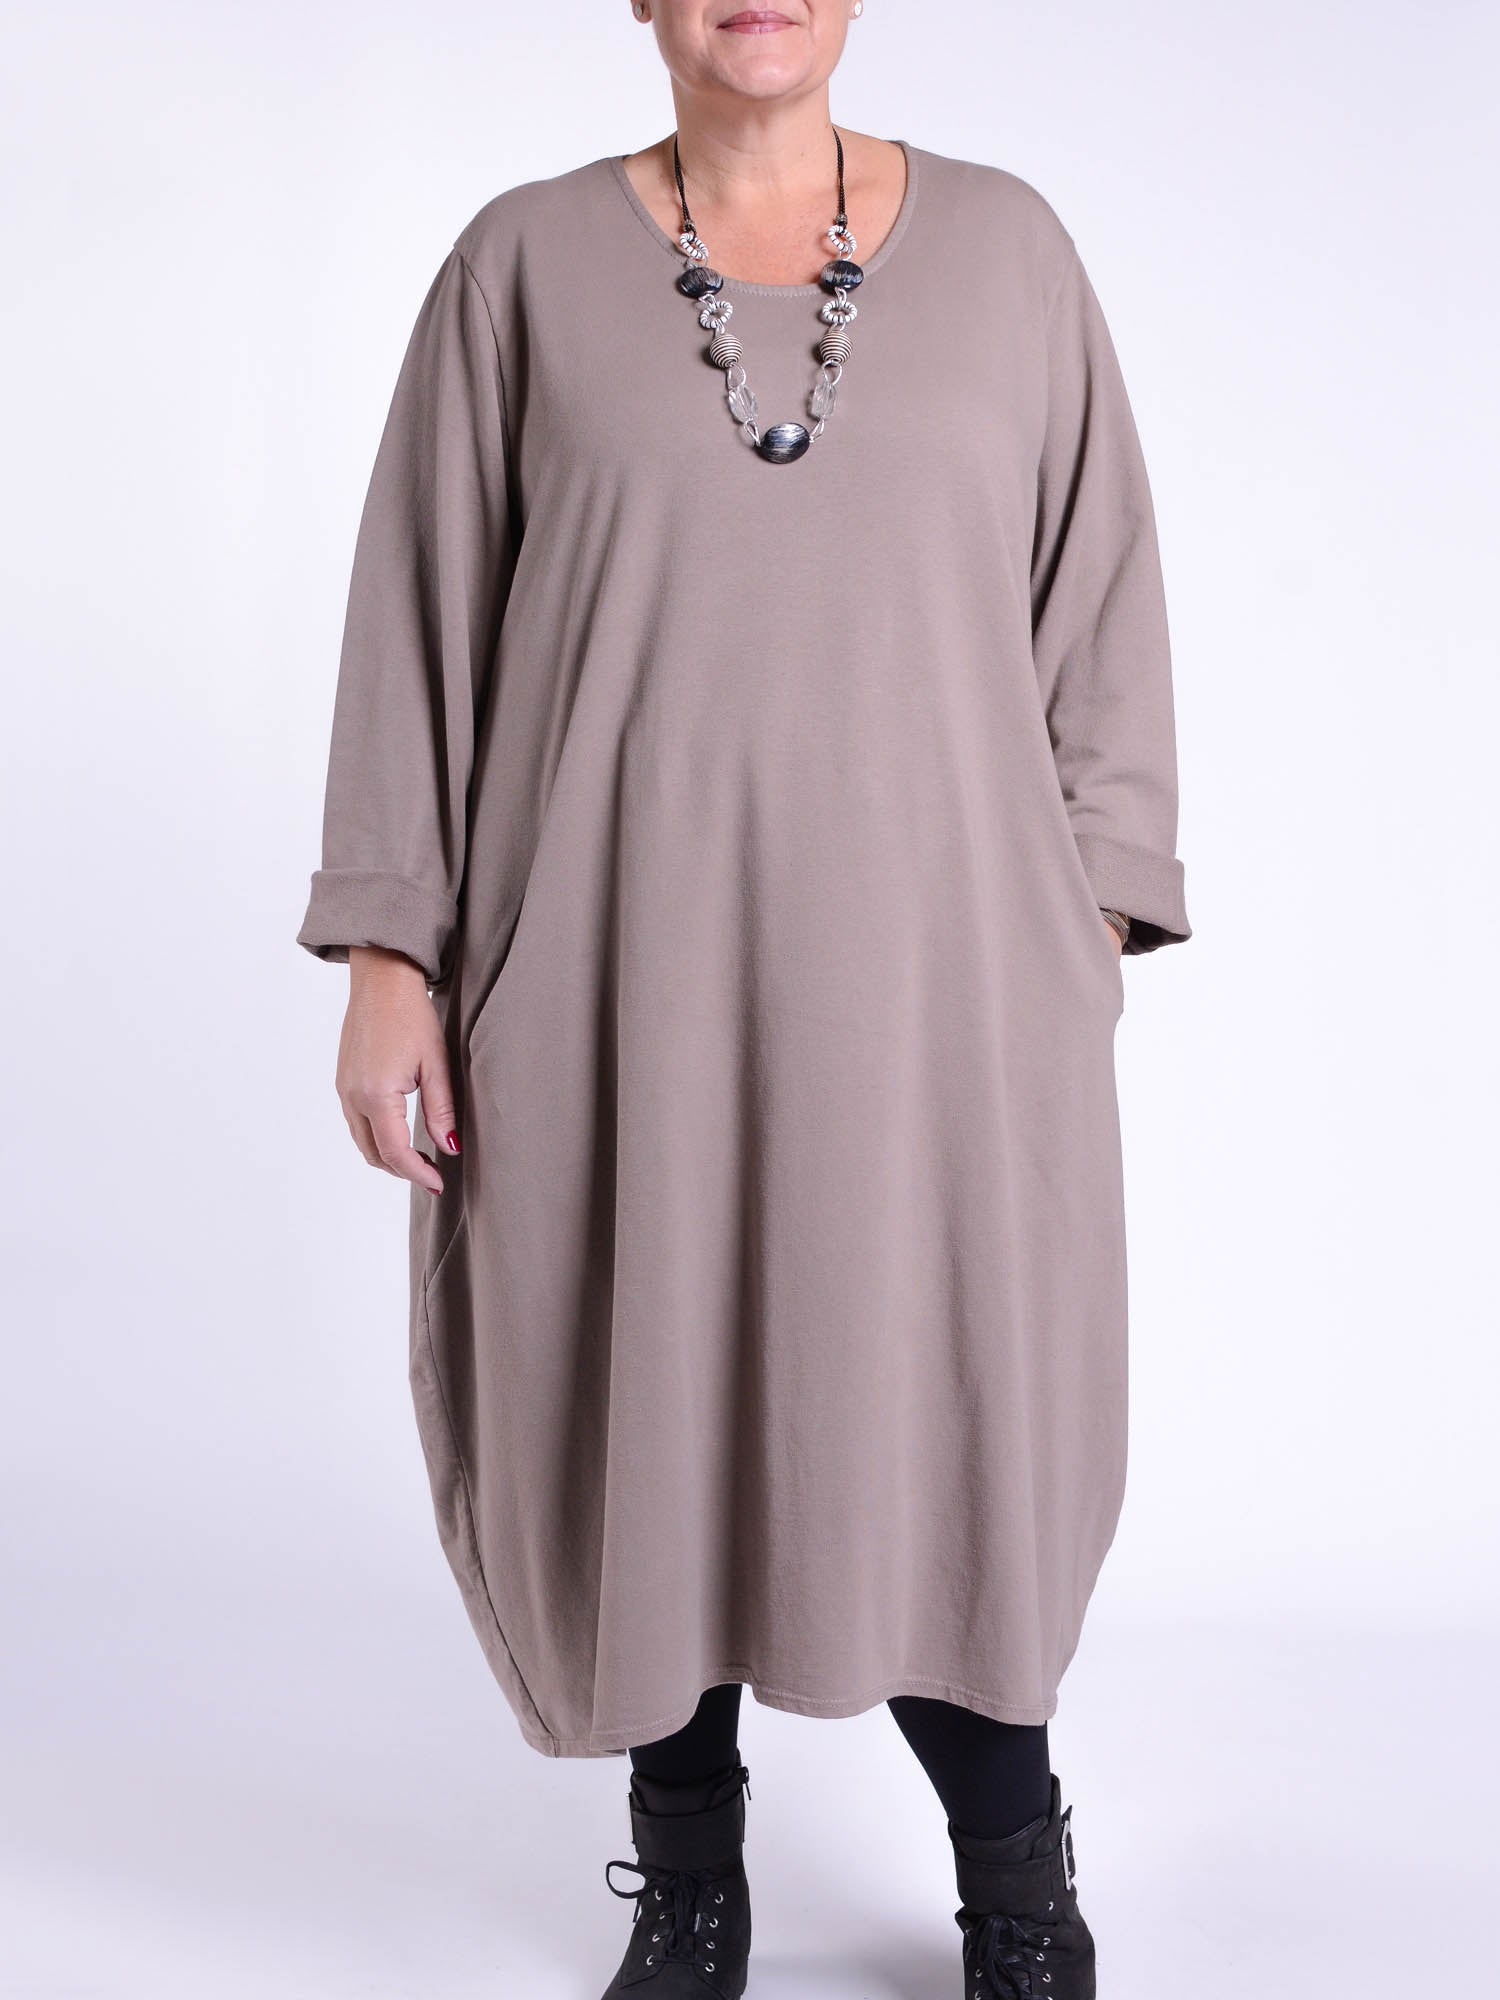 Lagenlook Basic Casual Tunic Dress - 9469 Cotton, Dresses, Pure Plus Clothing, Lagenlook Clothing, Plus Size Fashion, Over 50 Fashion